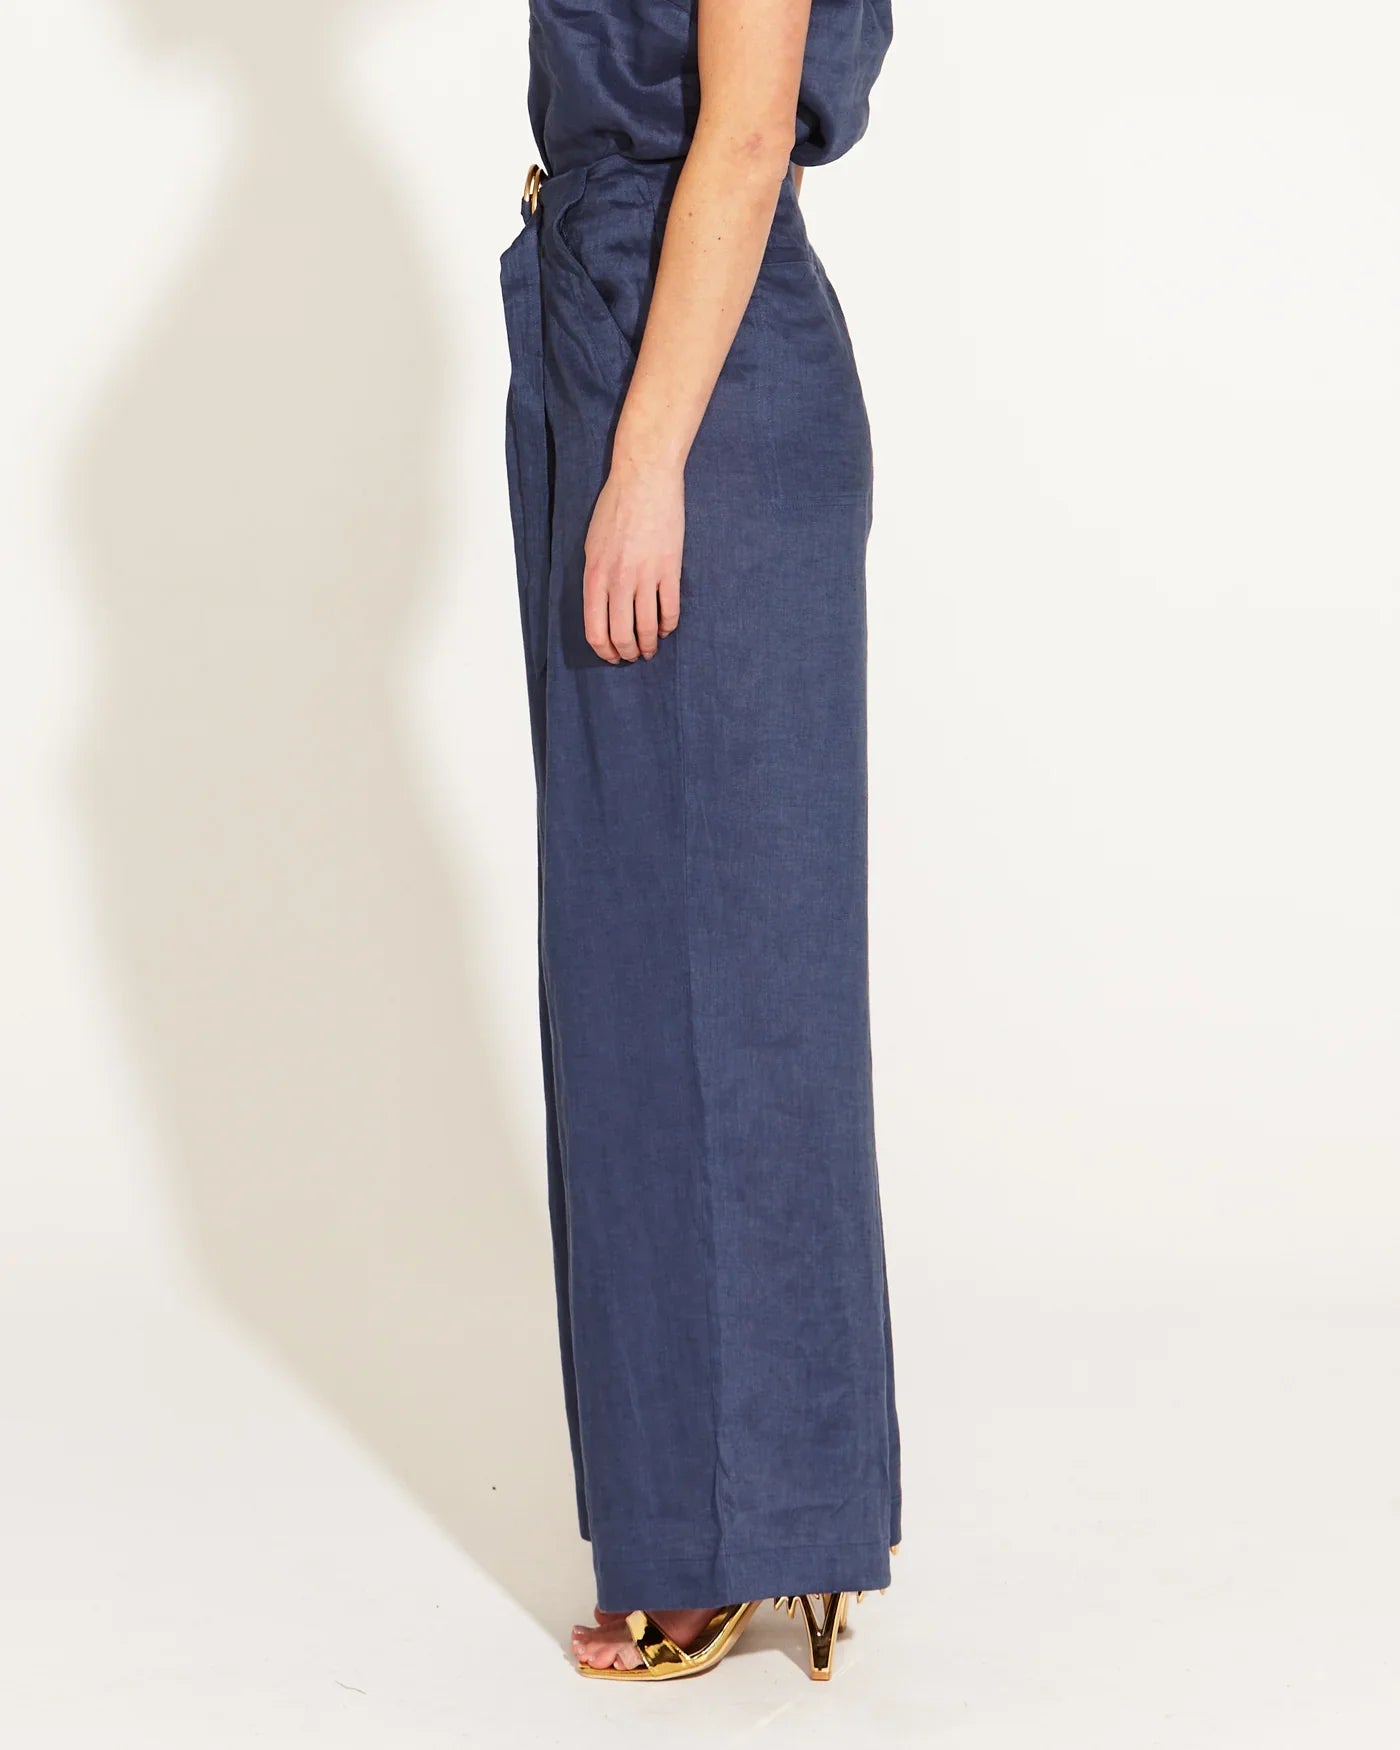 Fate & Becker A Walk In The Park Pant